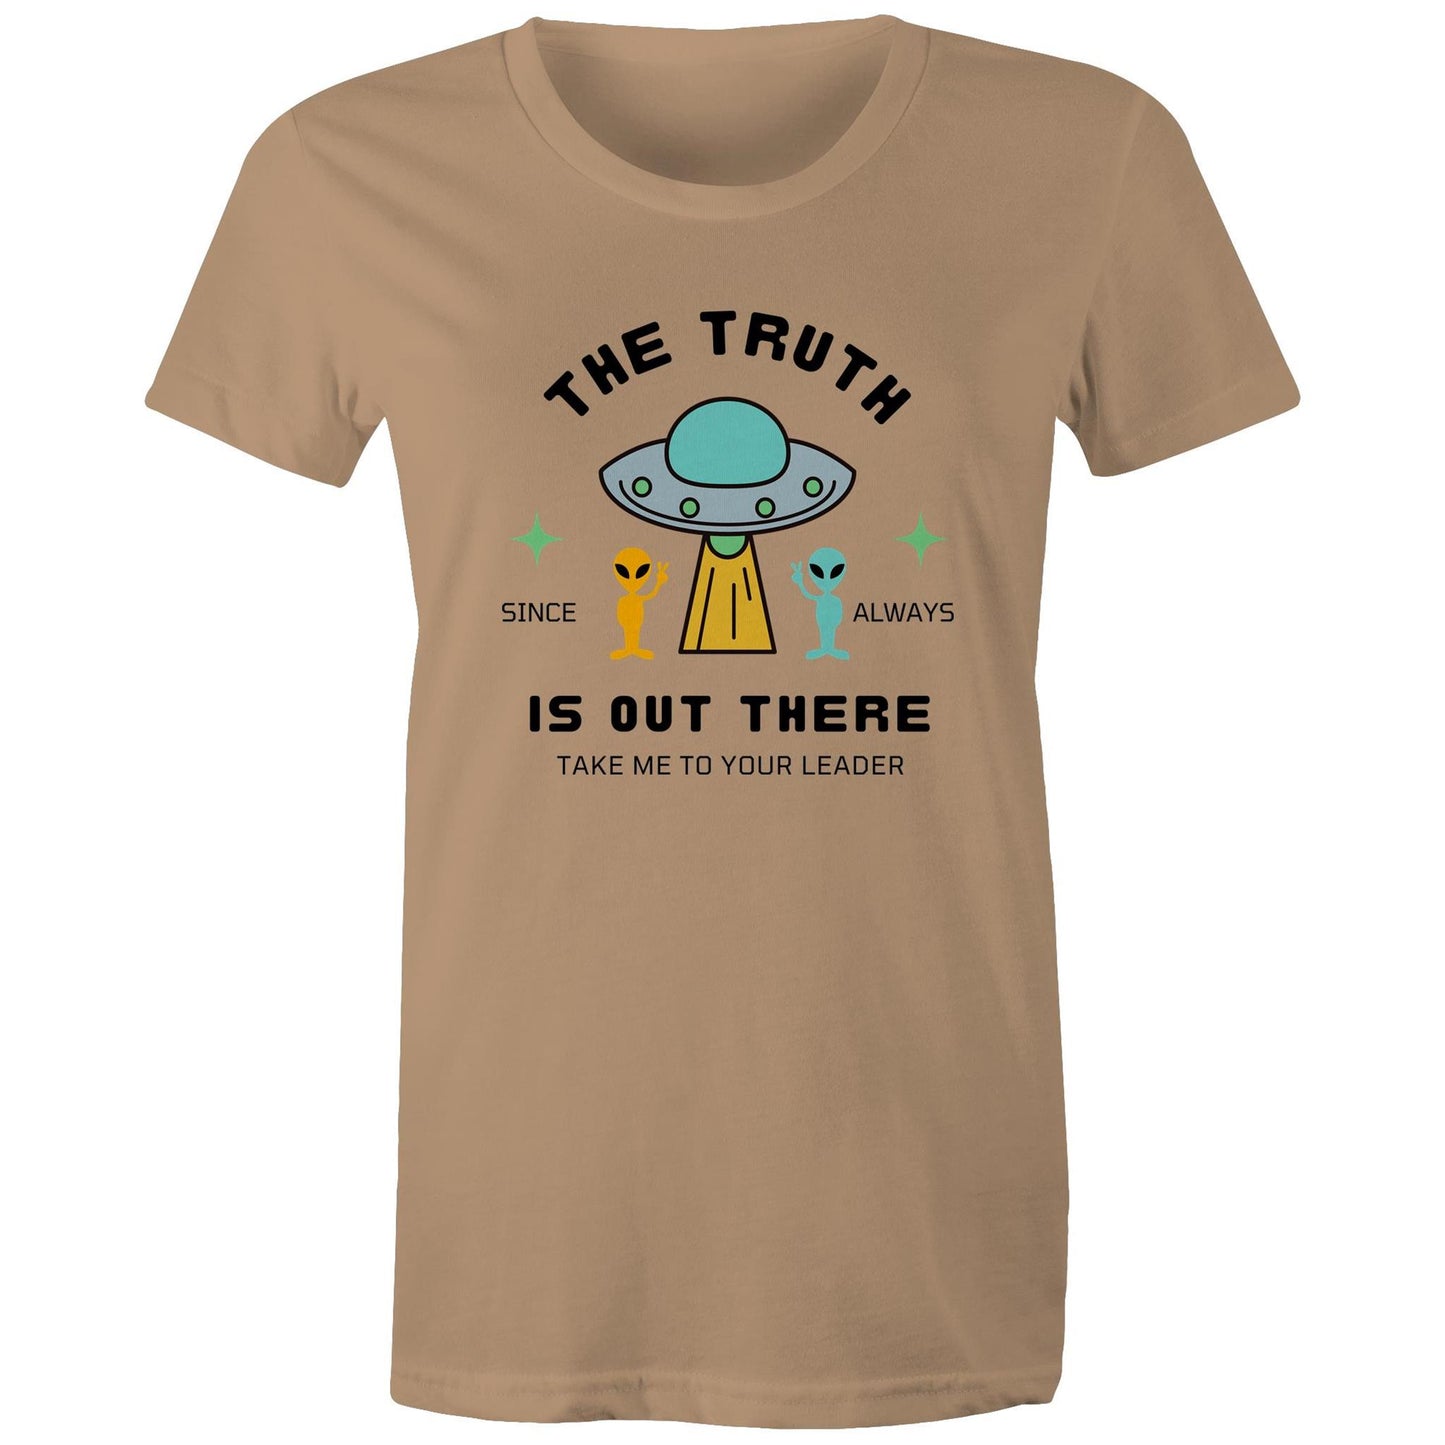 The Truth Is Out There - Womens T-shirt Tan Womens T-shirt Sci Fi